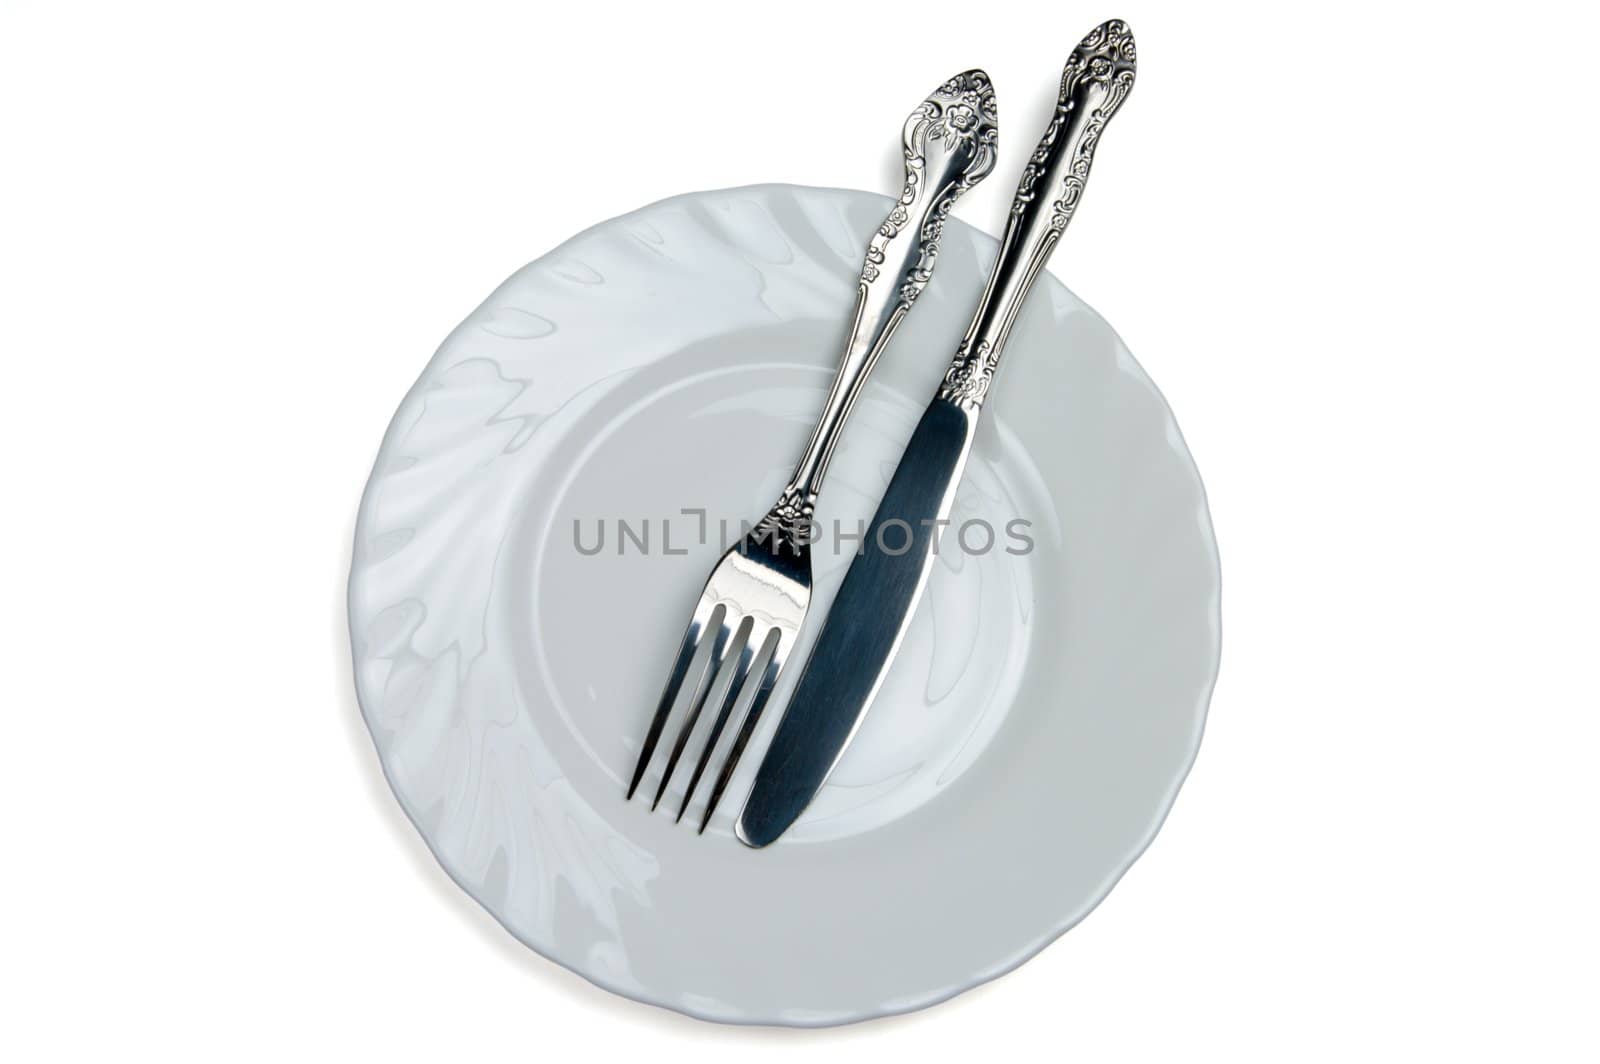 Knife and fork on a white plate